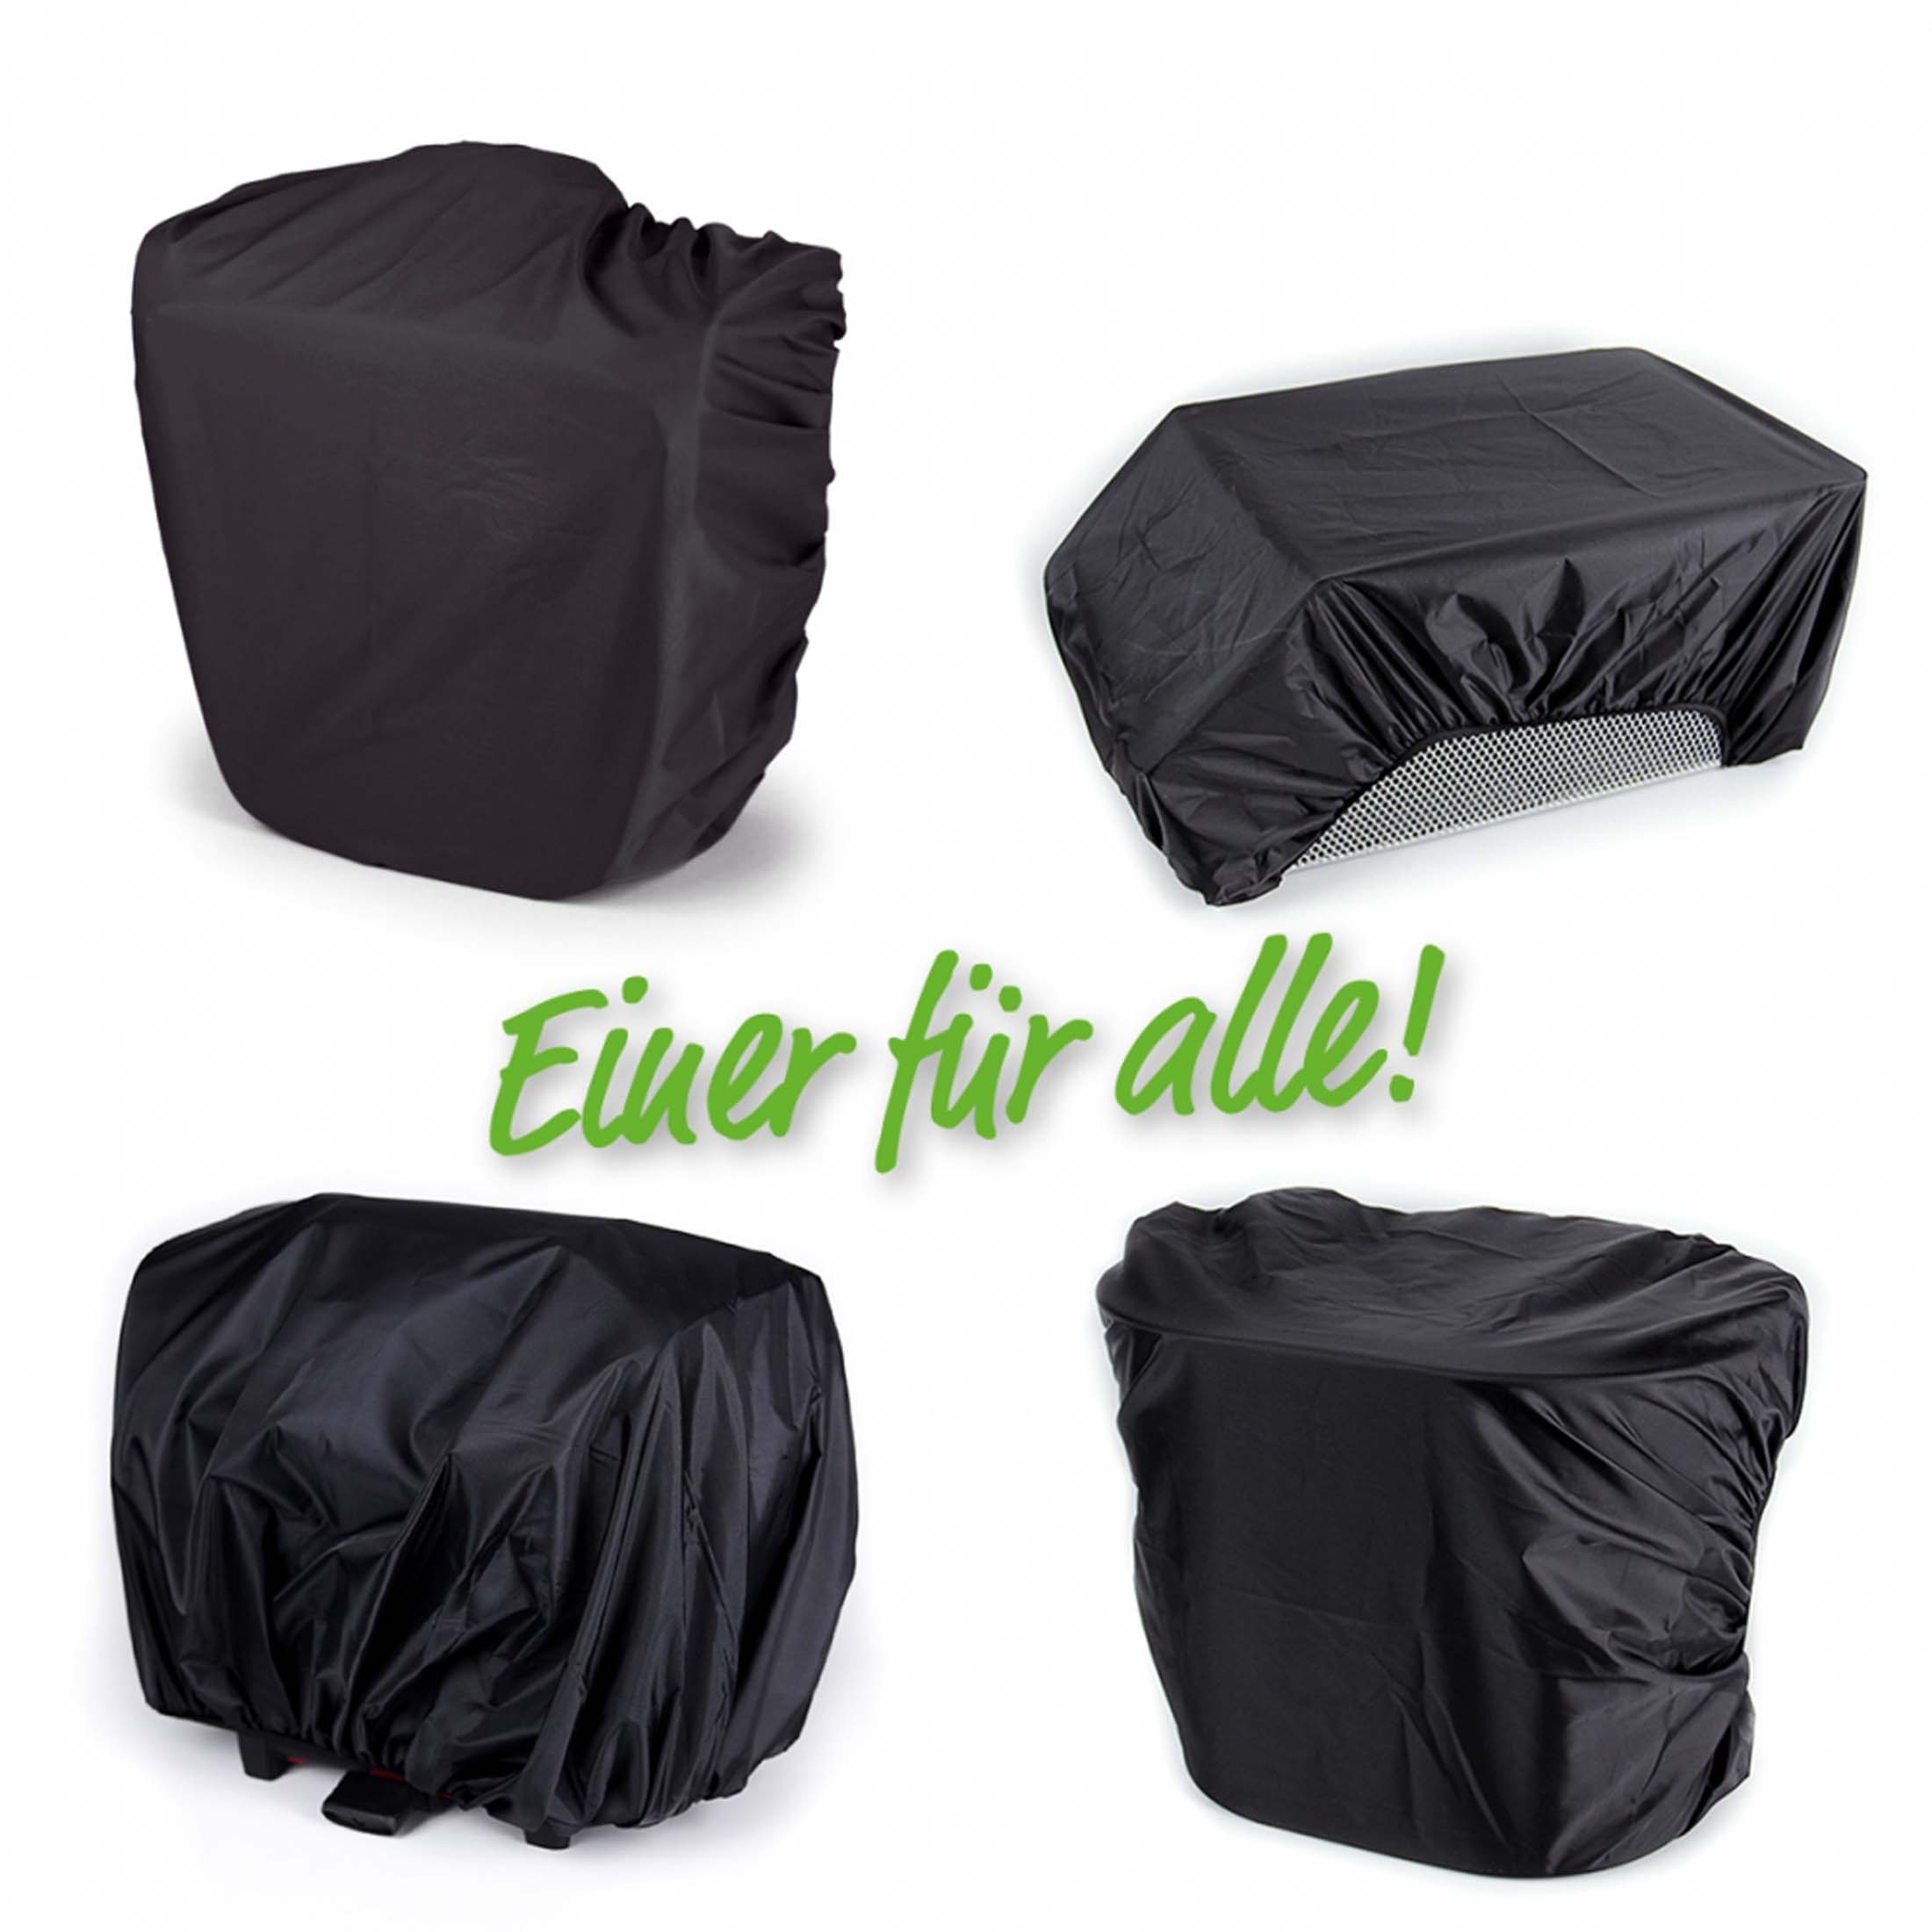 Haberland GmbH rain cover for luggage carrier bag single bags, baskets